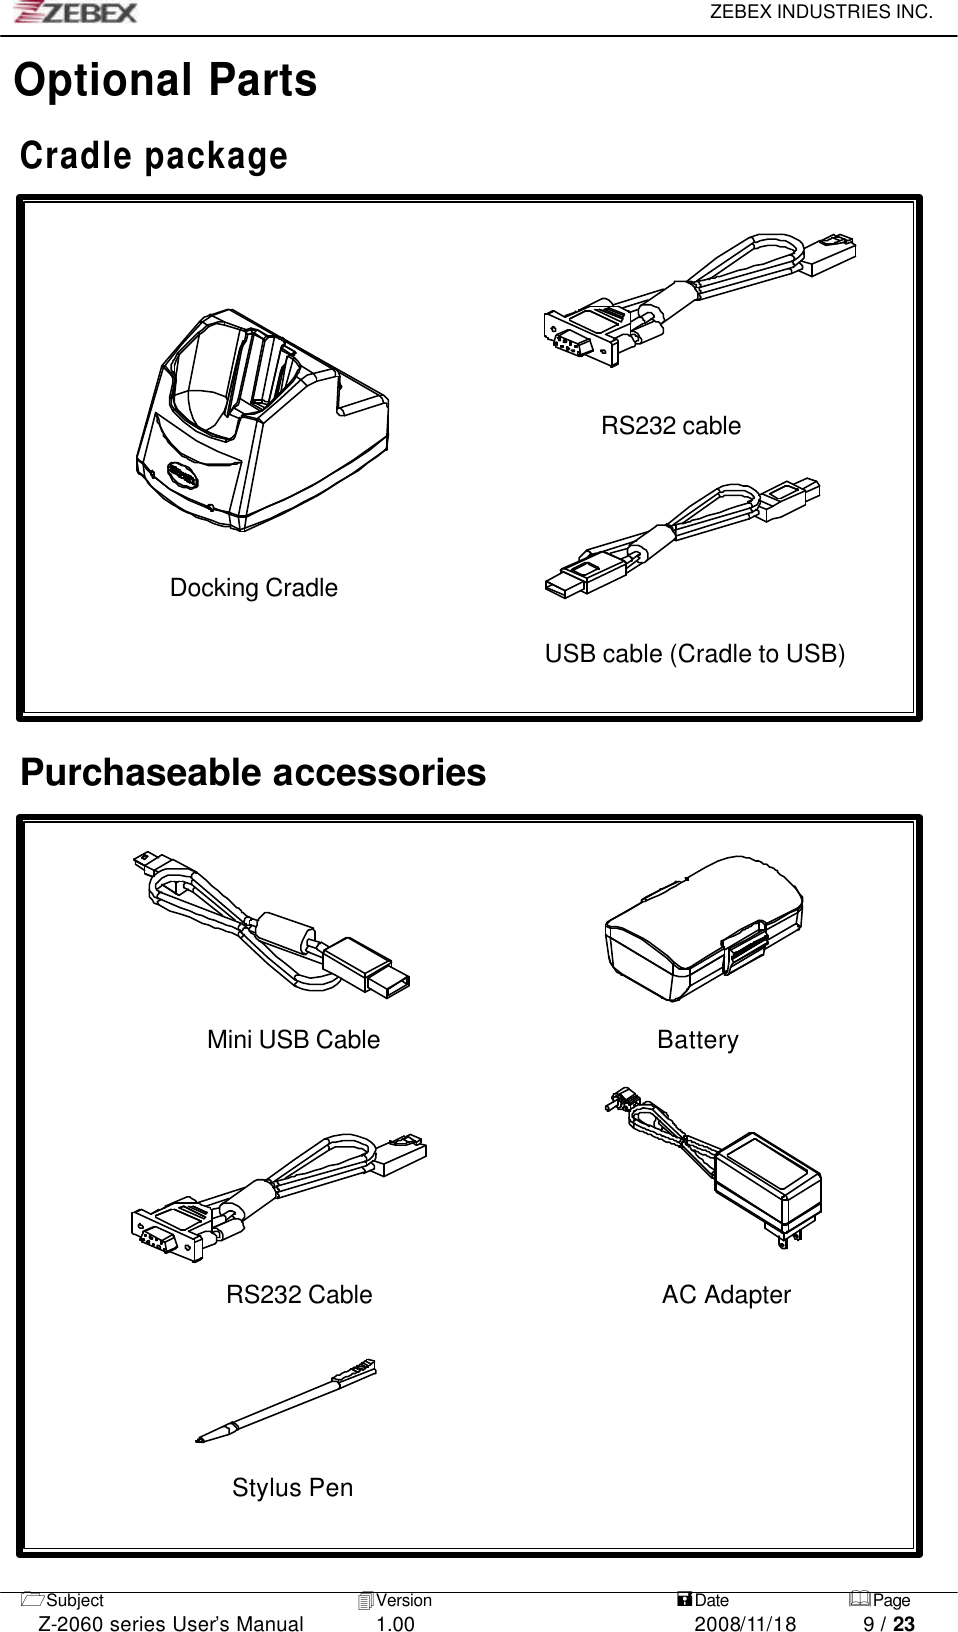     ZEBEX INDUSTRIES INC.   1Subject 4Version   =Date &amp;Page  Z-2060 series User’s Manual 1.00 2008/11/18 9 / 23 Optional Parts  Cradle package        RS232 cable     Docking Cradle                          USB cable (Cradle to USB)                Purchaseable accessories         Mini USB Cable                      Battery                                                       RS232 Cable                       AC Adapter     Stylus Pen  